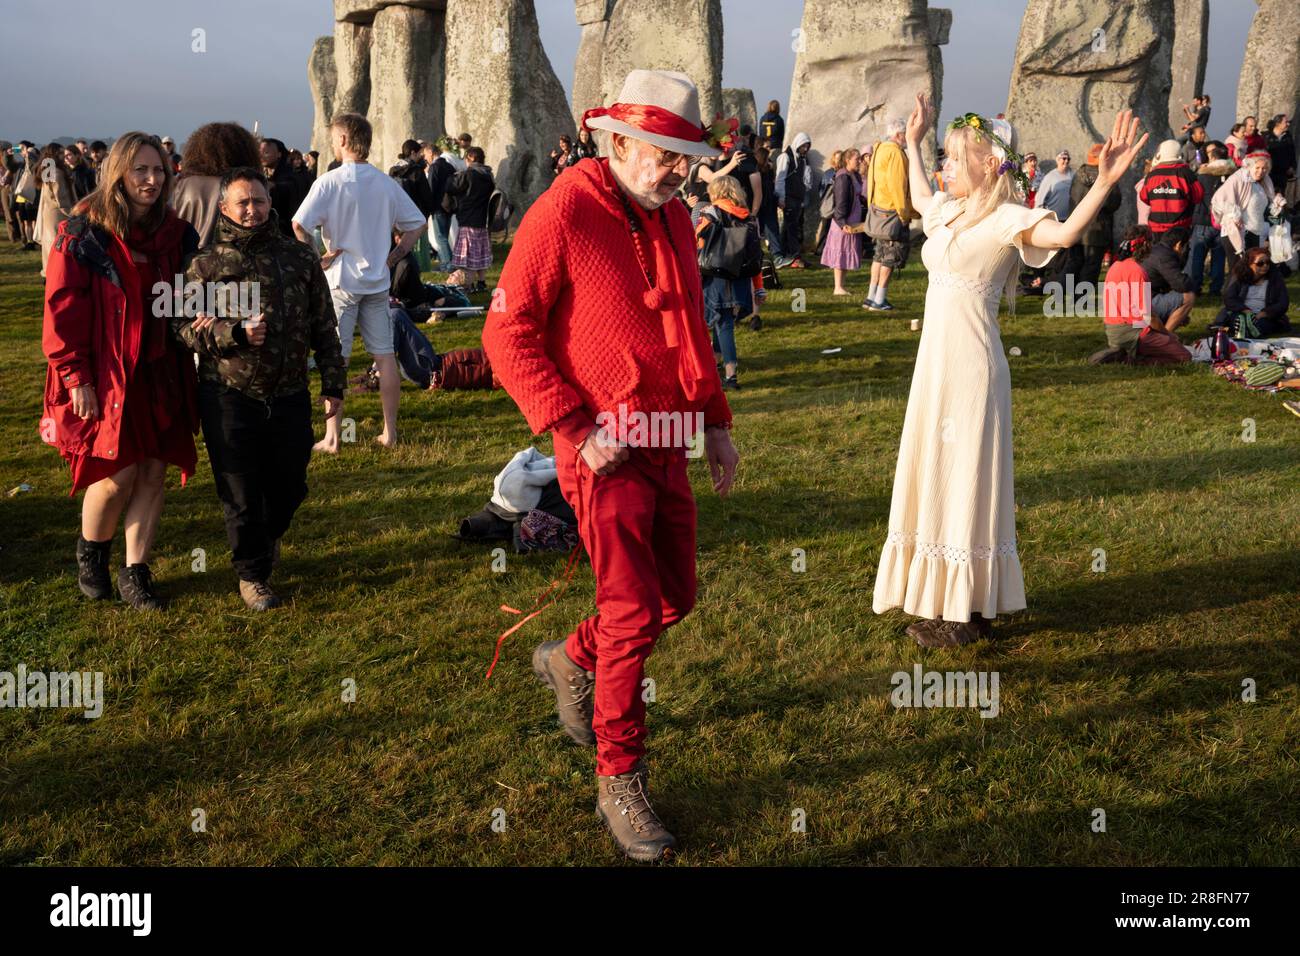 Spiritually-minded revellers celebrate the summer Solstice (mid-summer and longest day) at the ancient late-Neolithic stones of Stonehenge, on 21st June 2023, in Wiltshire, England. The summer solstice is the northern hemisphere's longest day and shortest night of the year, when the earth’s axis is tilted at its closest point from the sun and pagans say the ancient monument is a sacred place that links the Earth, Moon, Sun and the seasons. Stonehenge was built in three phases between 3,000 B.C. and 1,600 B.C. Stonehenge is owned by English Heritage who say 8,000 visitors were allowed into the Stock Photo